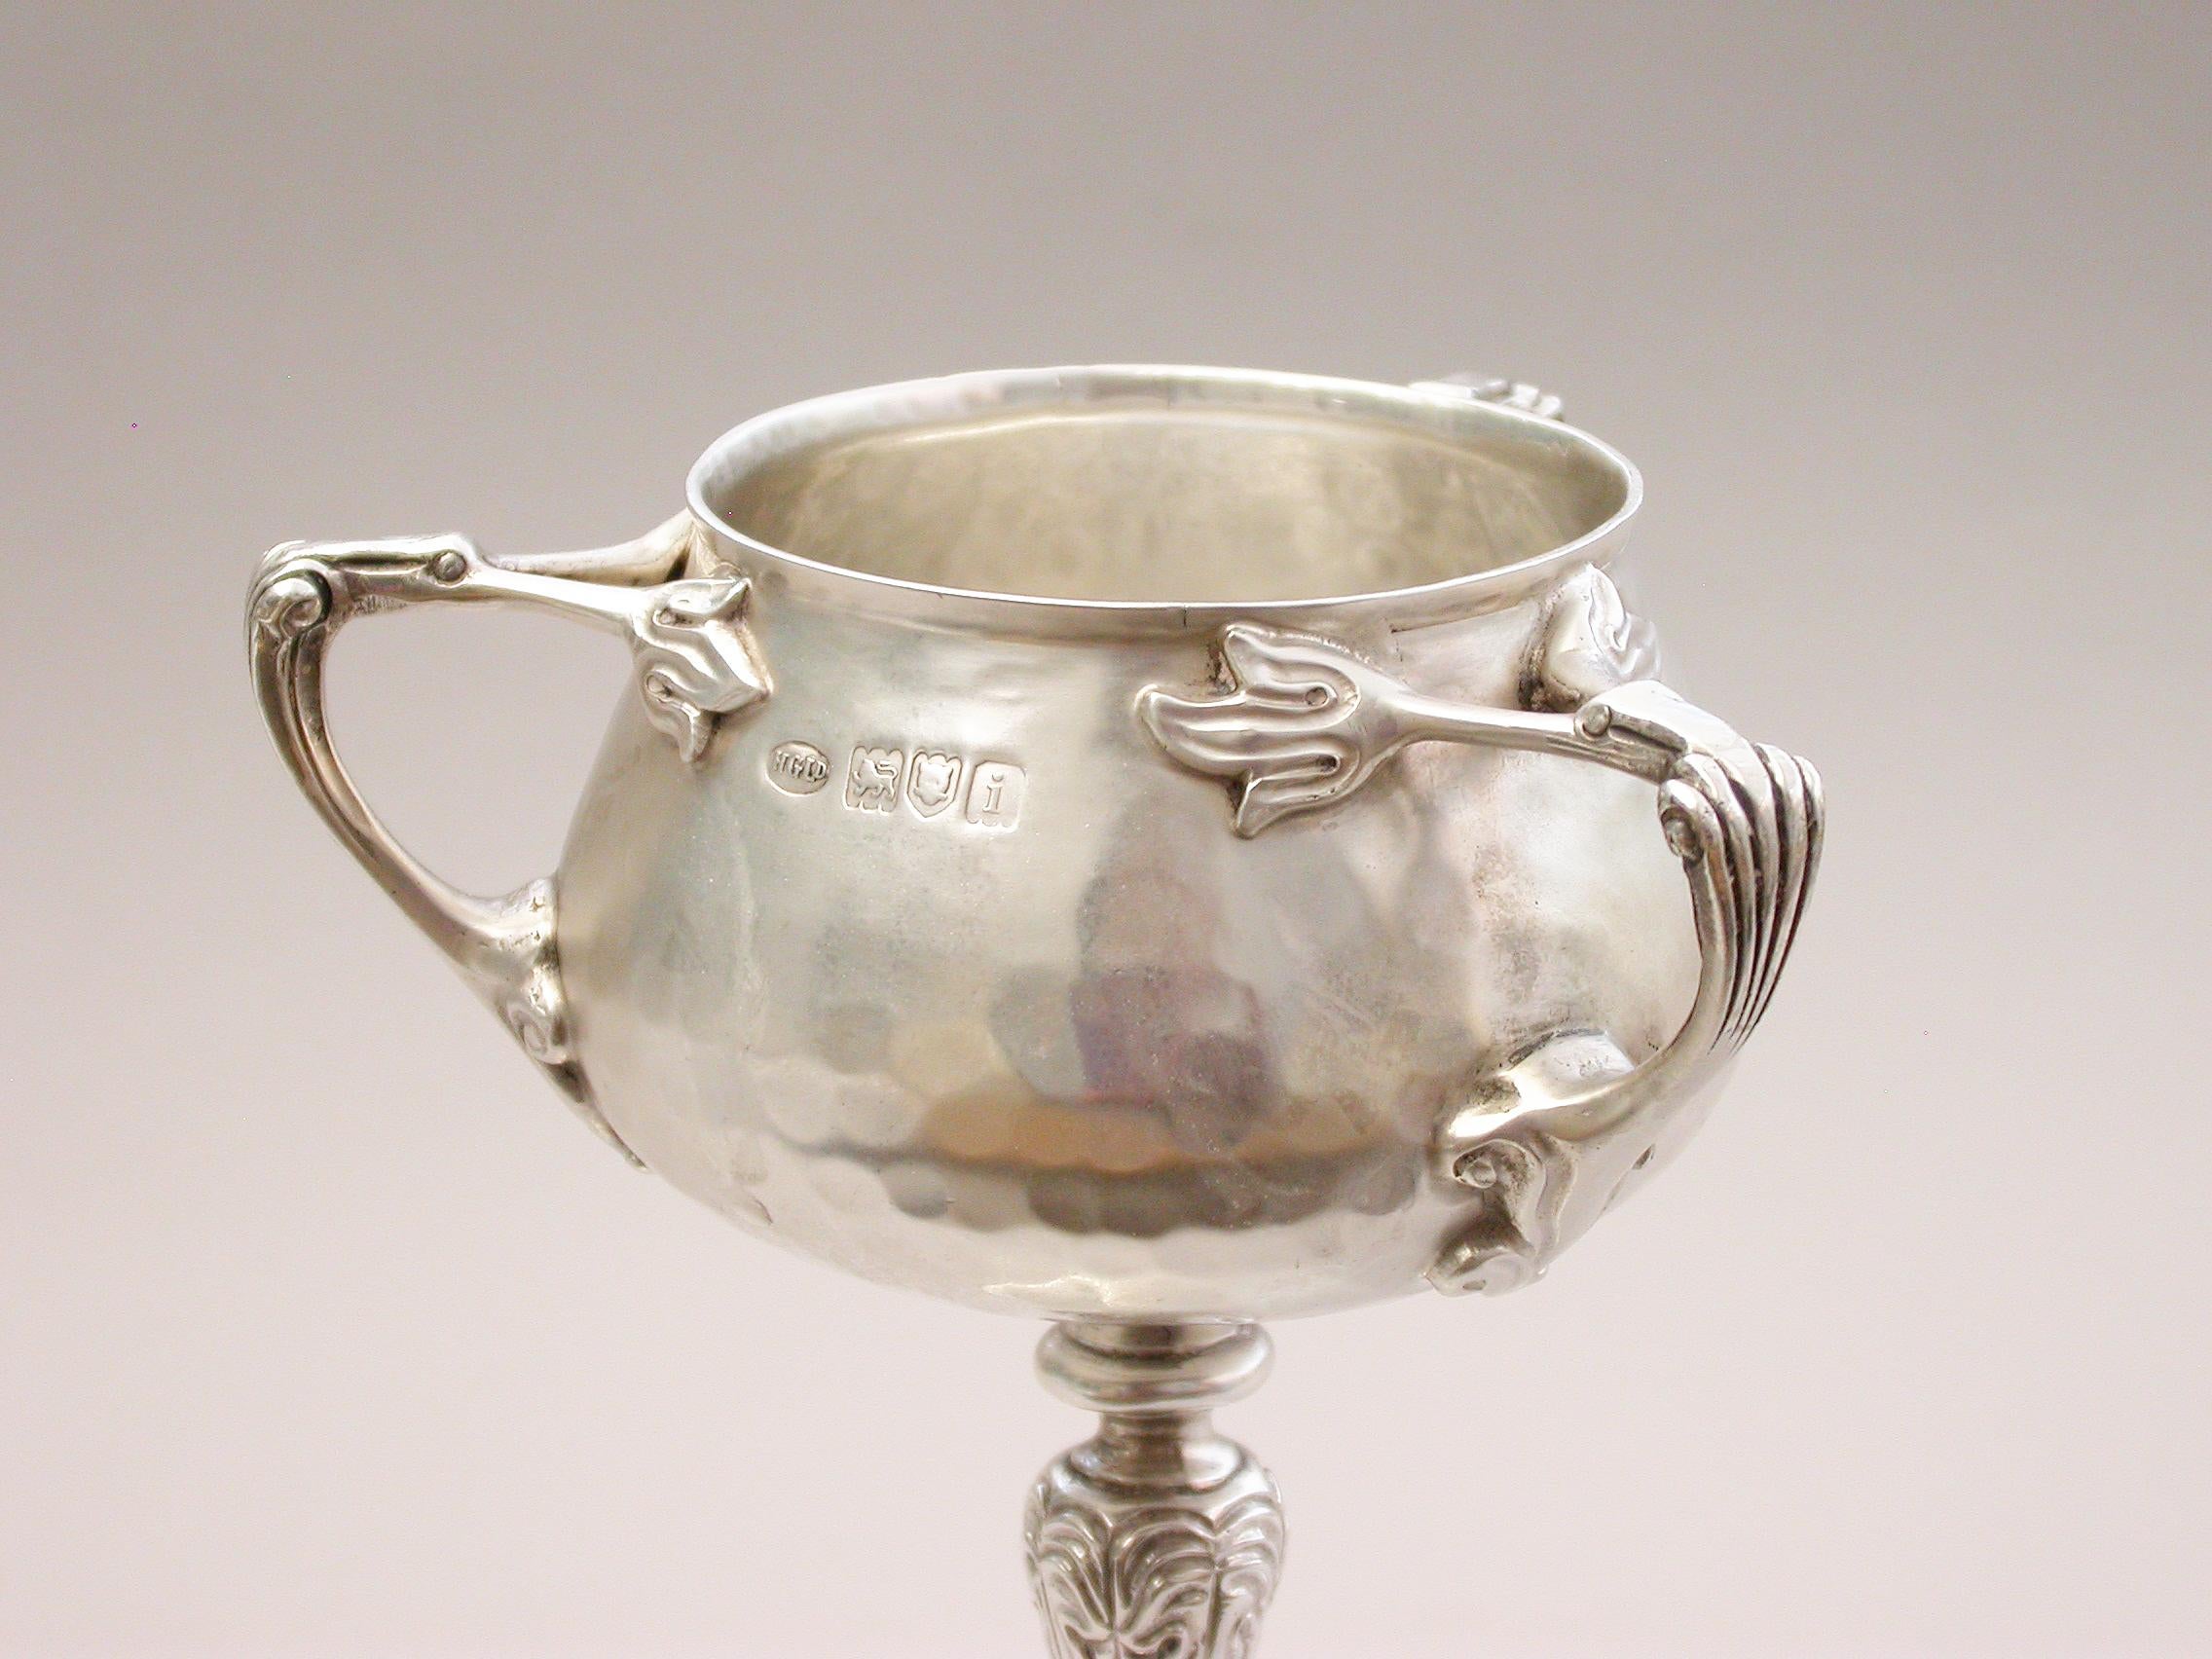 An early 20th century Arts & Crafts style hammered silver cup, with three applied handles and chased stem, of a good gauge and weight. A later (1960) engraved inscription to the base.

By H Greaves Ltd, London, 1904.

In good condition with no